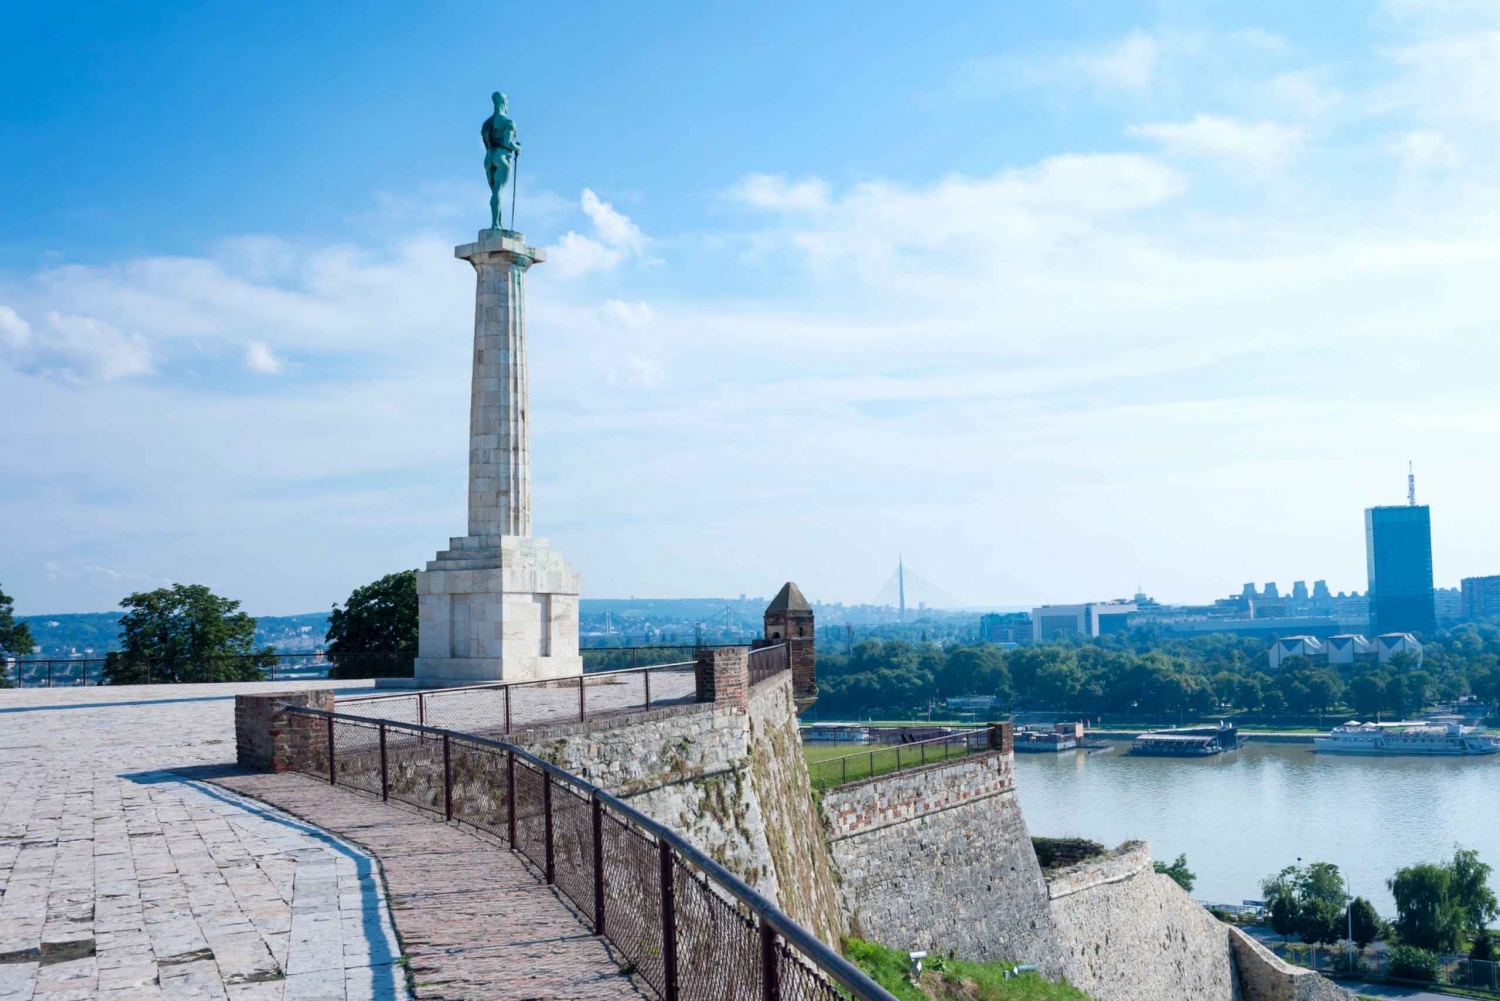 Beograd: Self-Guided City Highlights Scavenger Hunt & Tour